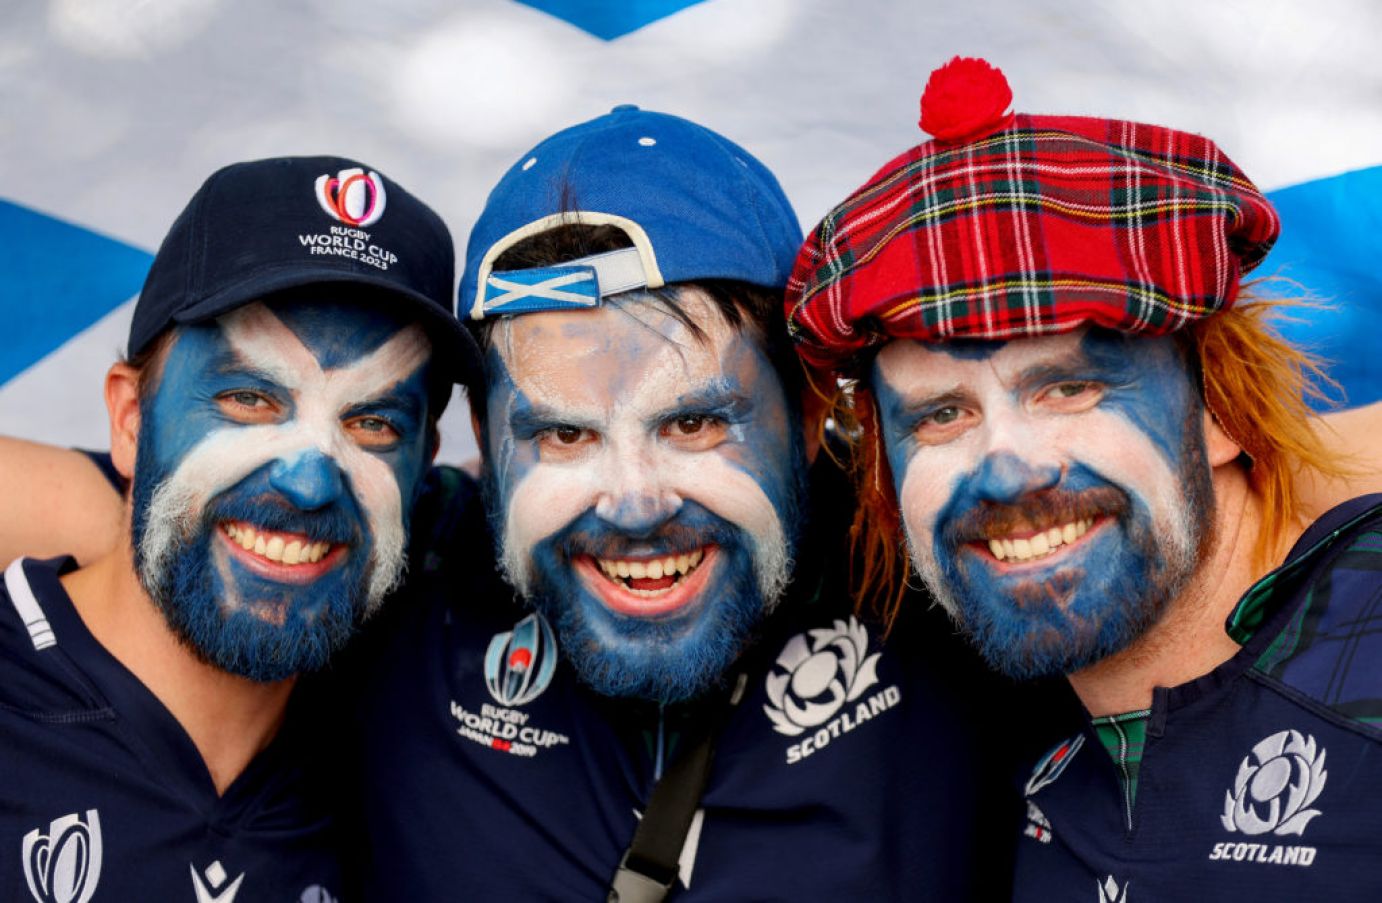 Scotland Fans Before The South Africa Game. Photo: Inpho